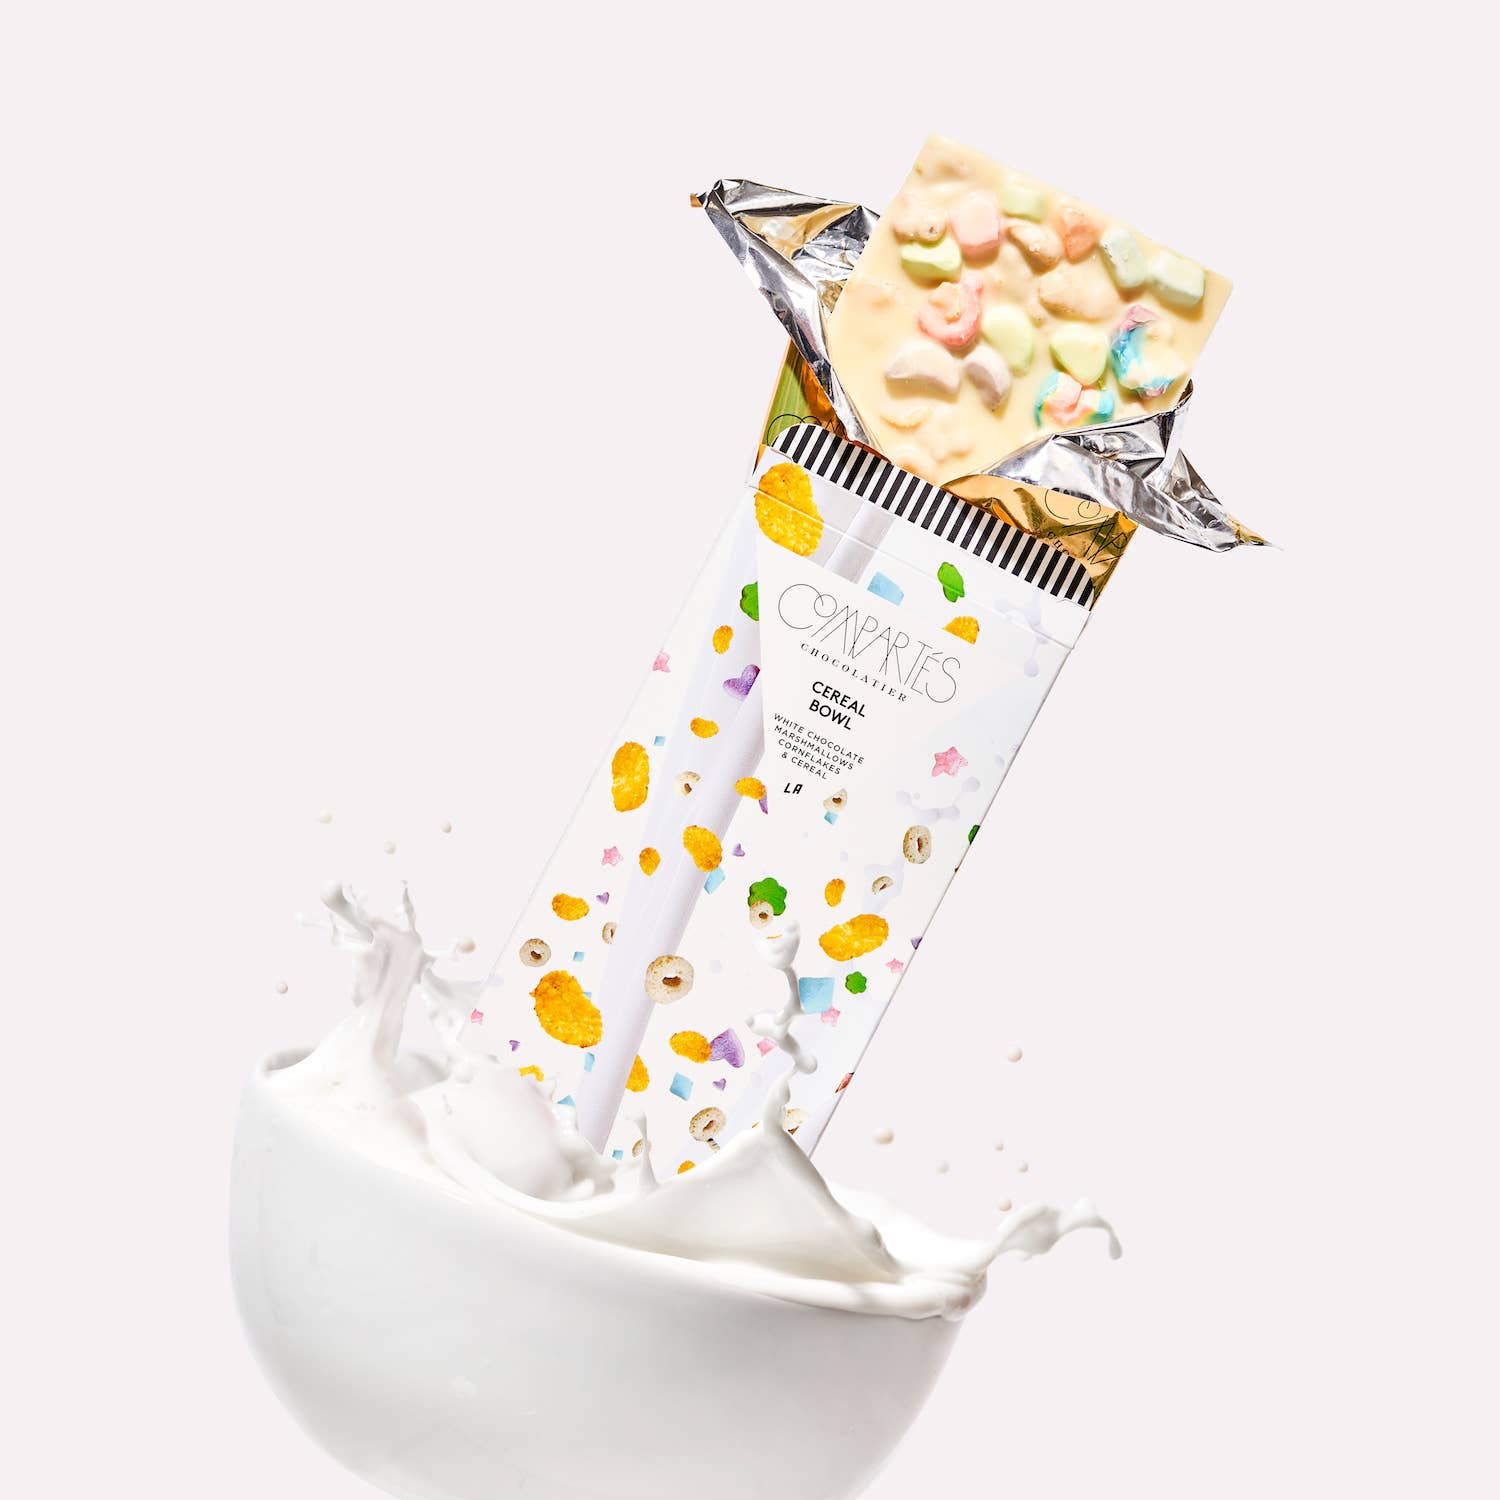 "Cereal Bowl" White Chocolate Bar